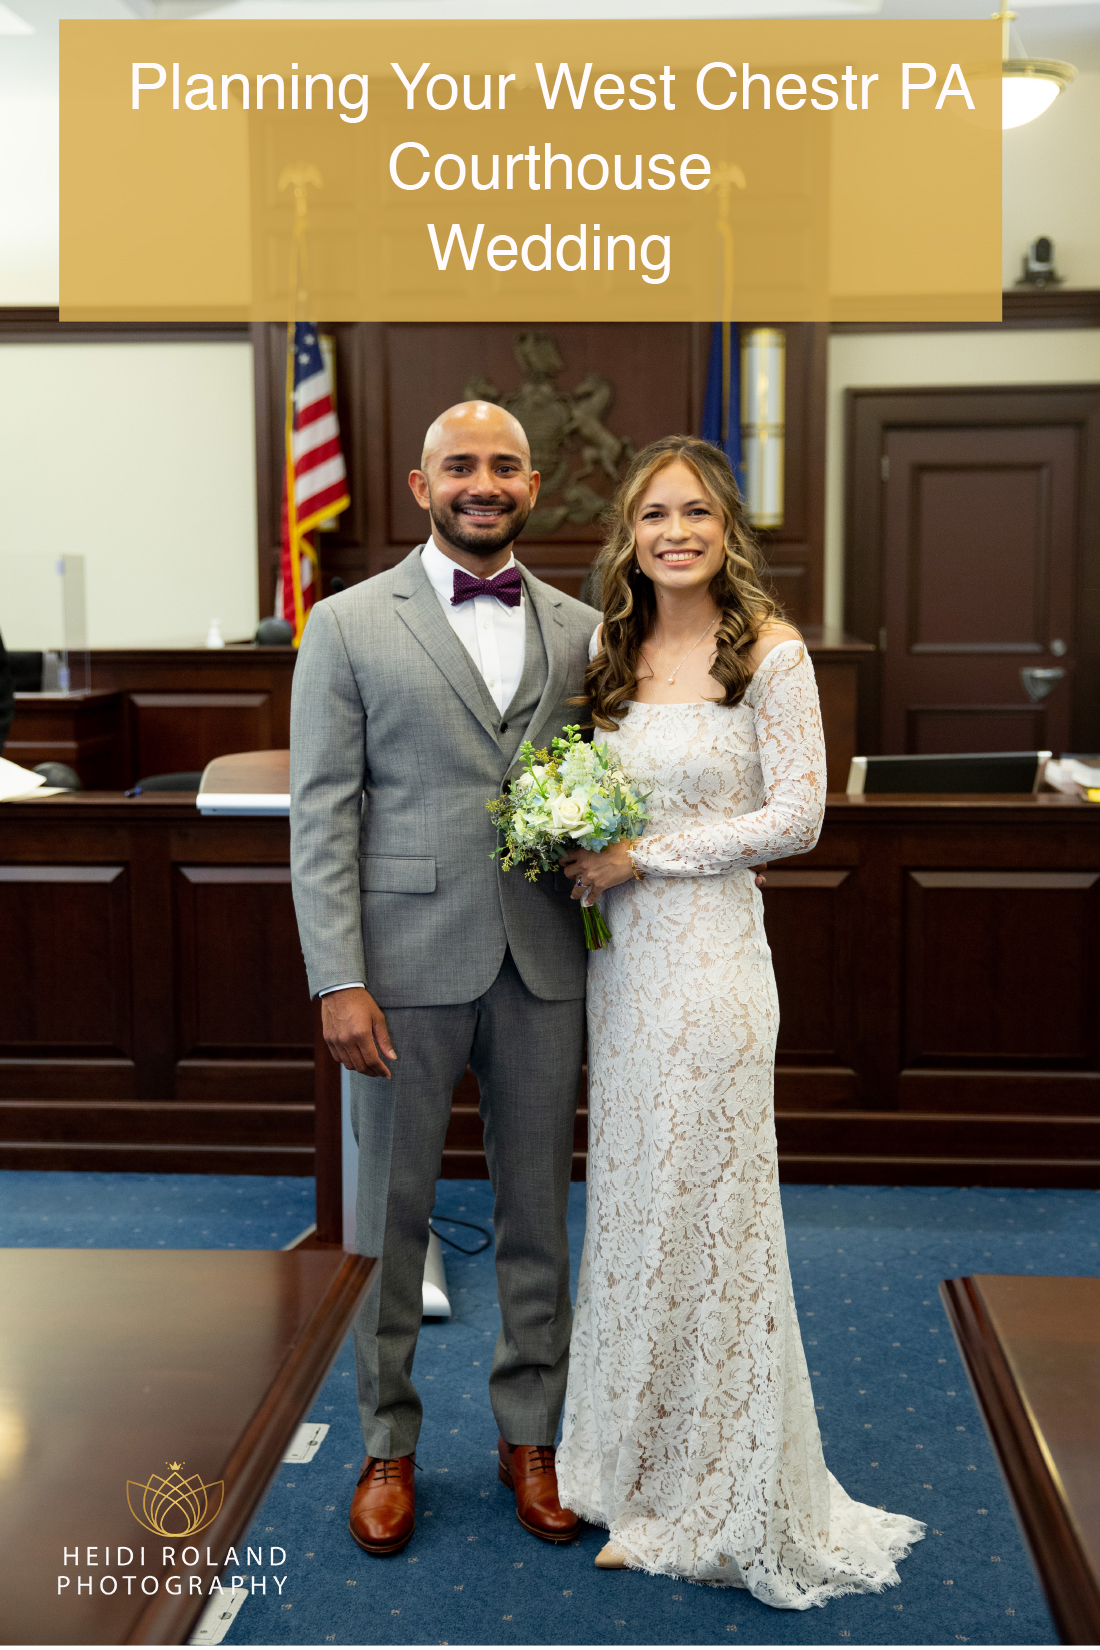 Bride and groom West Chester Courthouse Wedding Planning